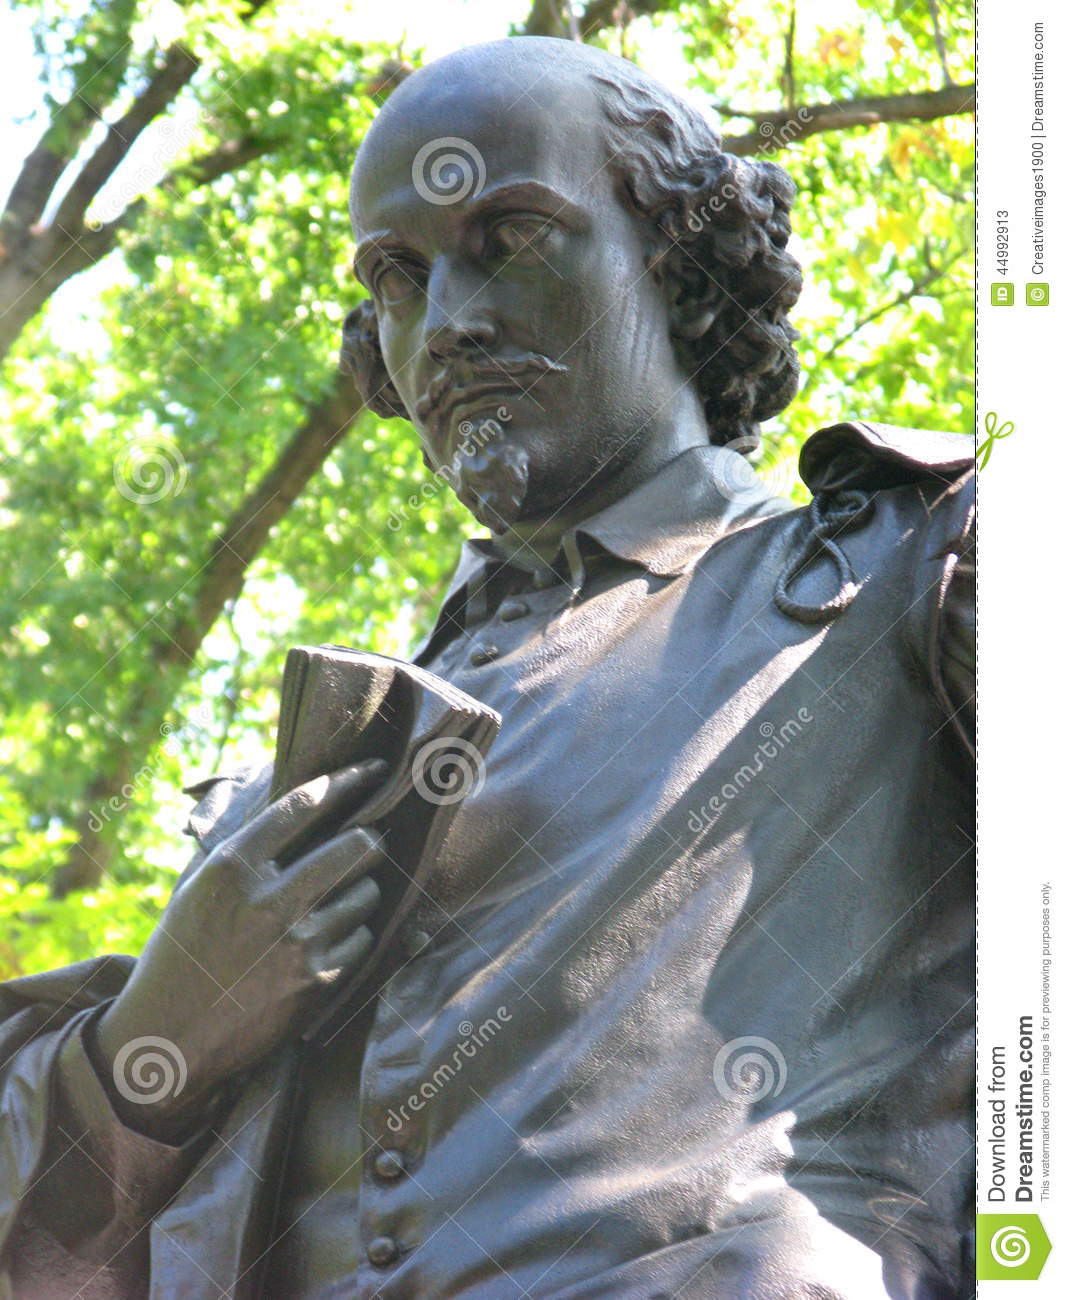 Statue Of William Shakespeare On The Literary Row In Central Park New